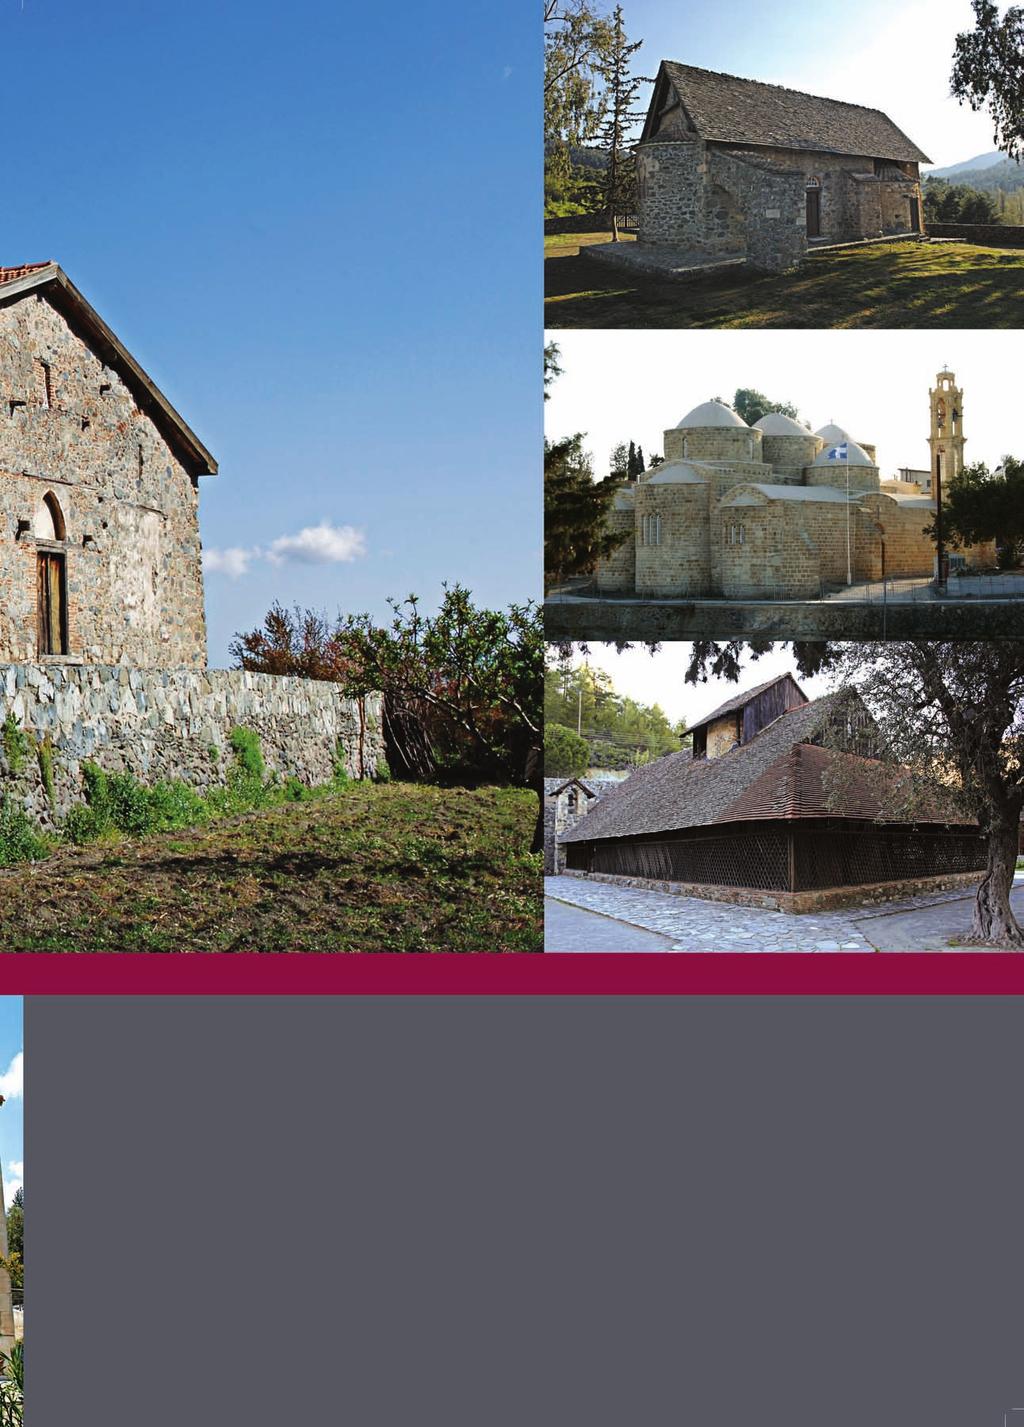 Creation Through Faith BYZANTINE ART AND CYPRIOT MONUMENTS OF UNESCO WITNESSING THE TRAILS OF A GLORIOUS HERITAGE C yprus, burdened with memories of its turbulent past and with its monuments standing